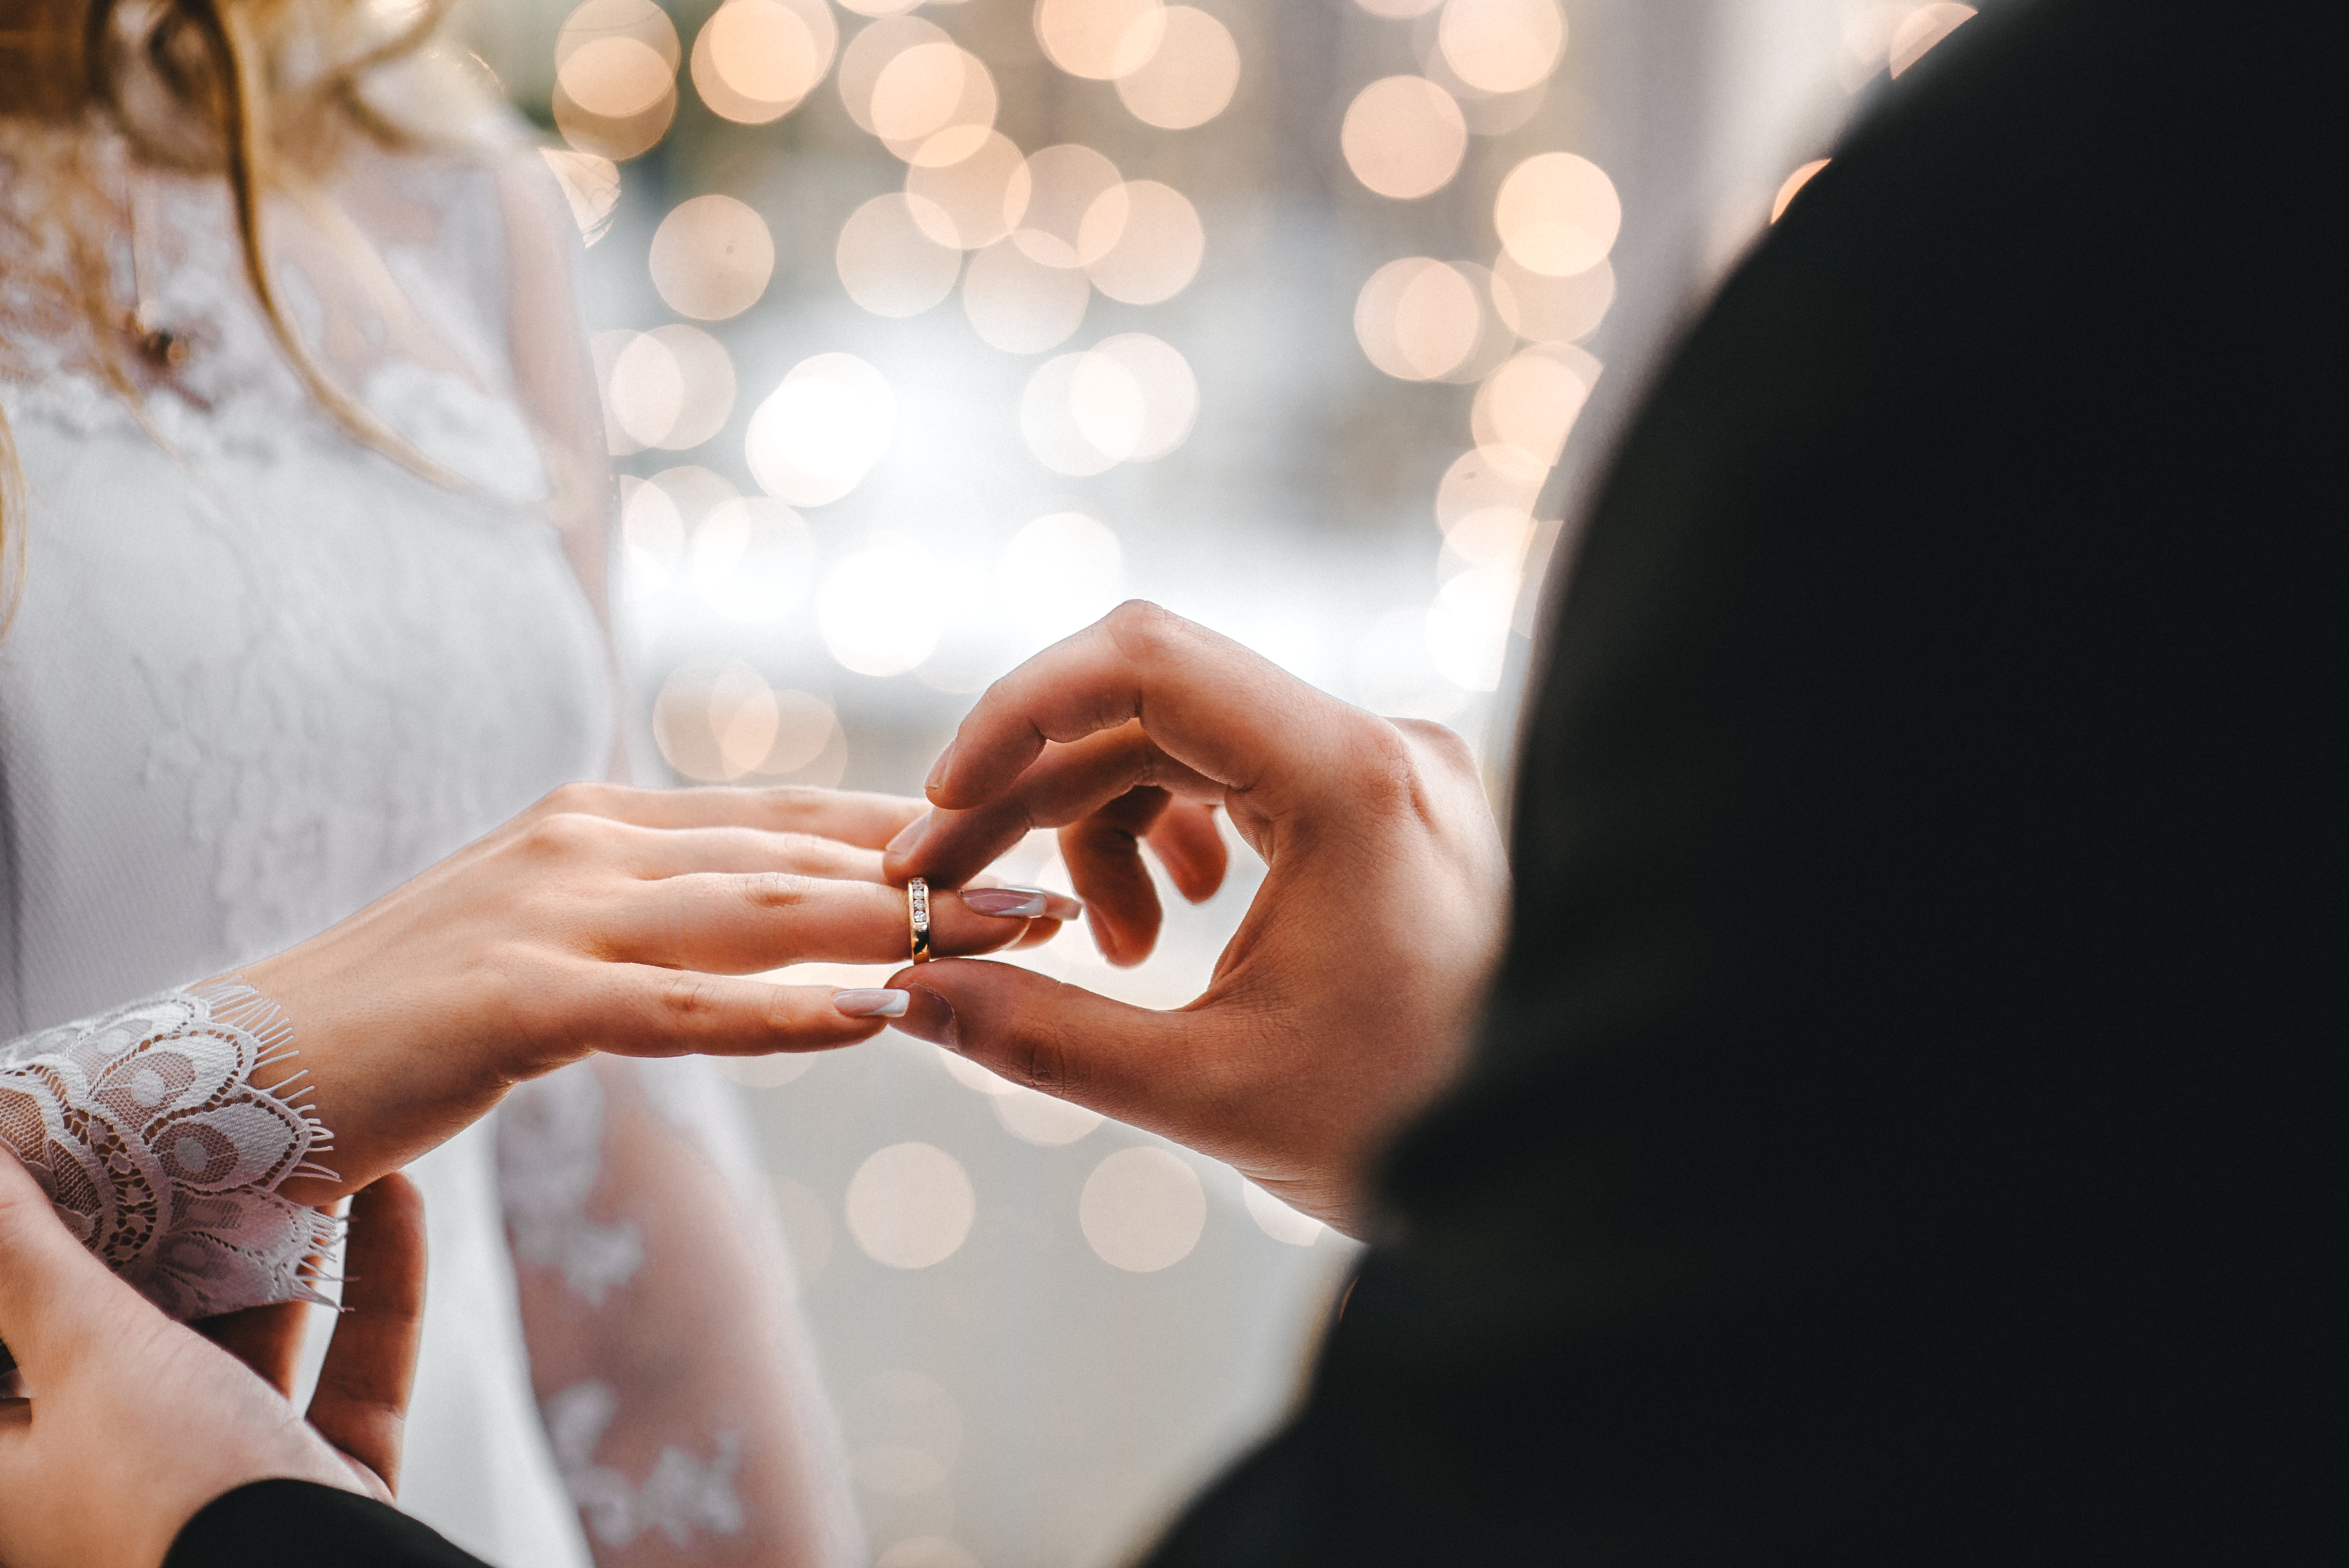 A couple exchanging rings | Source: Shutterstock